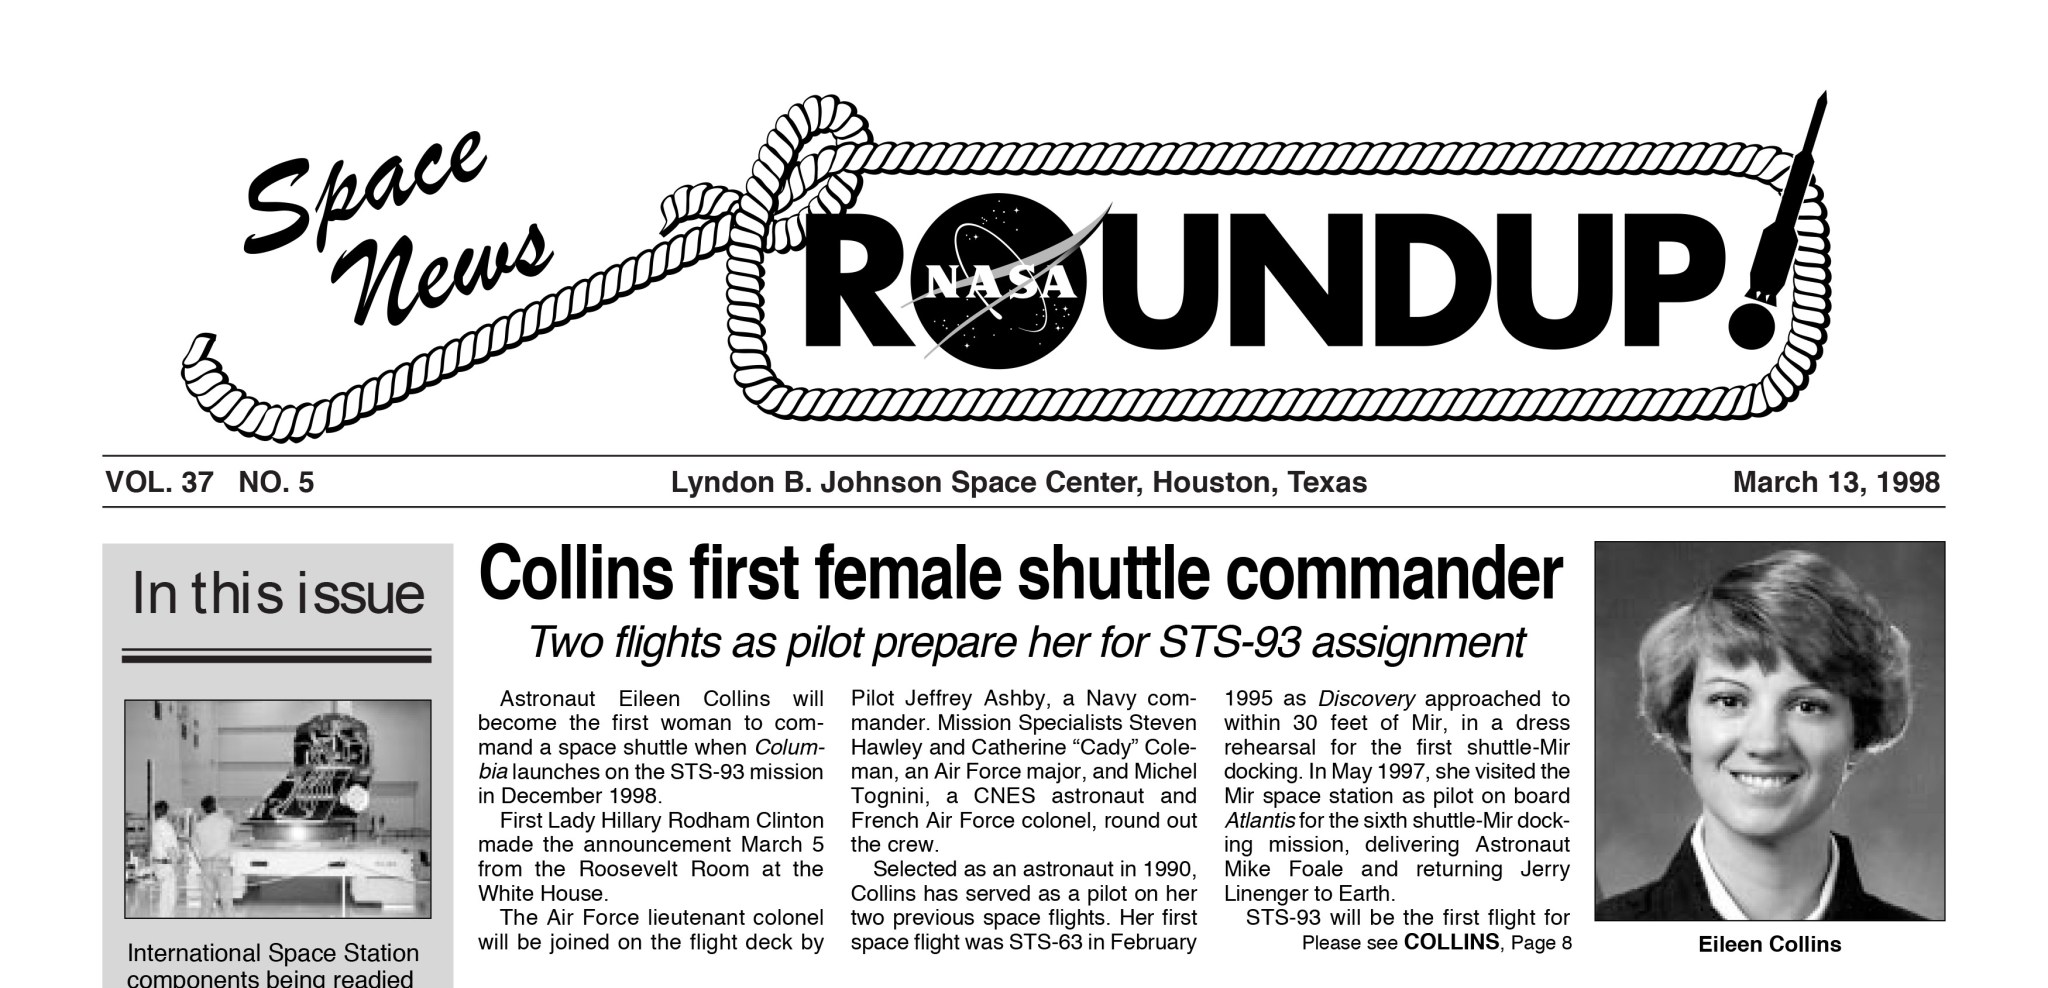 Front page of the Space News Roundup for March 13, 1998